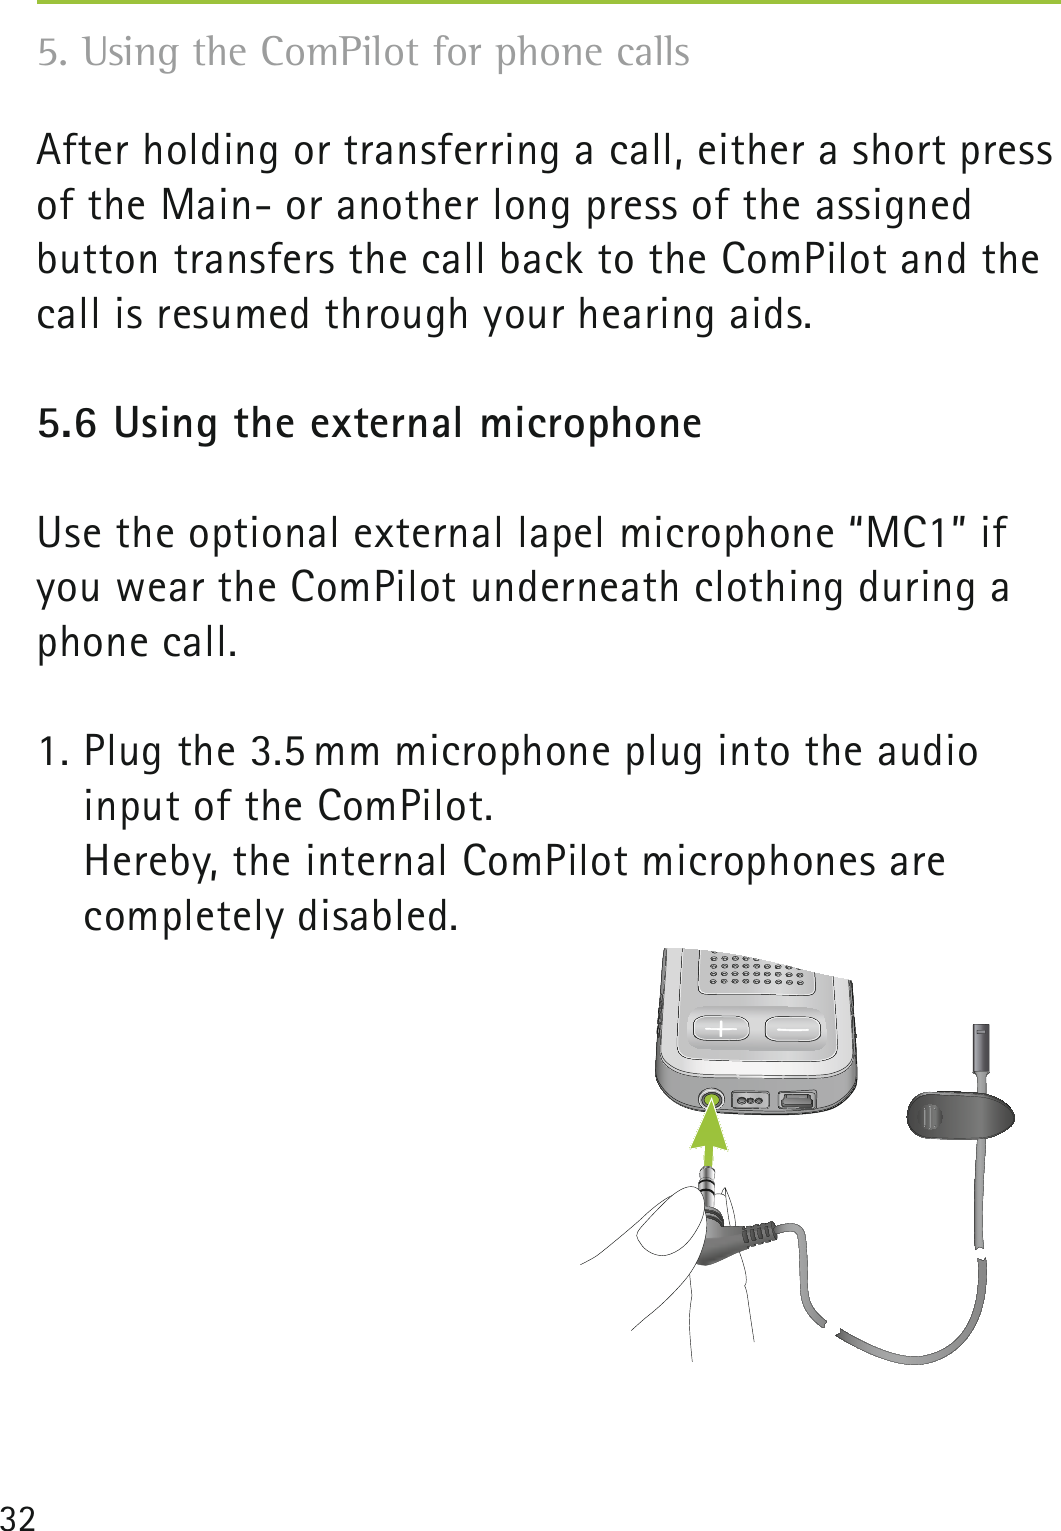 325. Using the ComPilot for phone calls After holding or transferring a call, either a short press of the Main- or another long press of the assigned button transfers the call back to the ComPilot and the call is resumed through your hearing aids.5.6 Using the external microphoneUse the optional external lapel microphone “MC1” if you wear the ComPilot underneath clothing during a phone call. 1. Plug the 3.5 mm microphone plug into the audio  input of the ComPilot.   Hereby, the internal ComPilot microphones are  completely disabled.